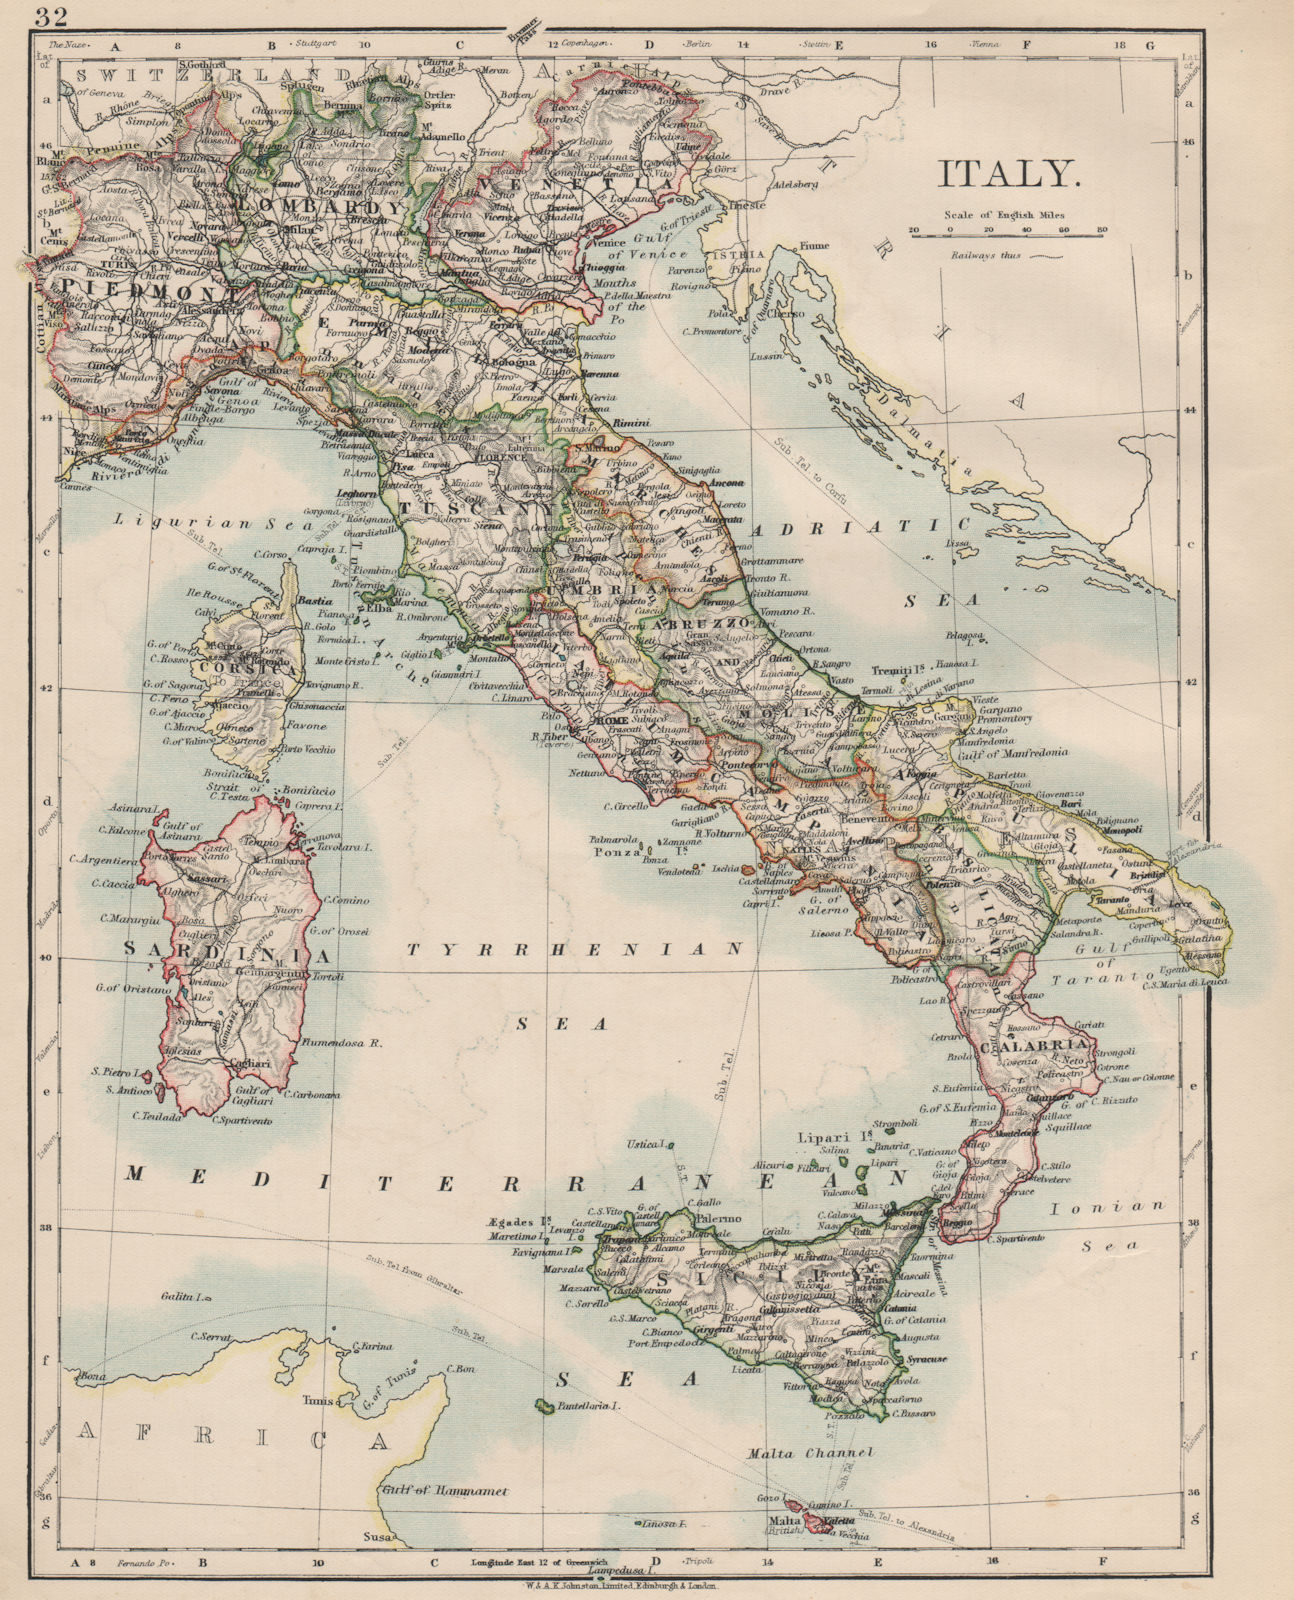 Associate Product ITALY. Showing states/territorial divisions. JOHNSTON 1903 old antique map